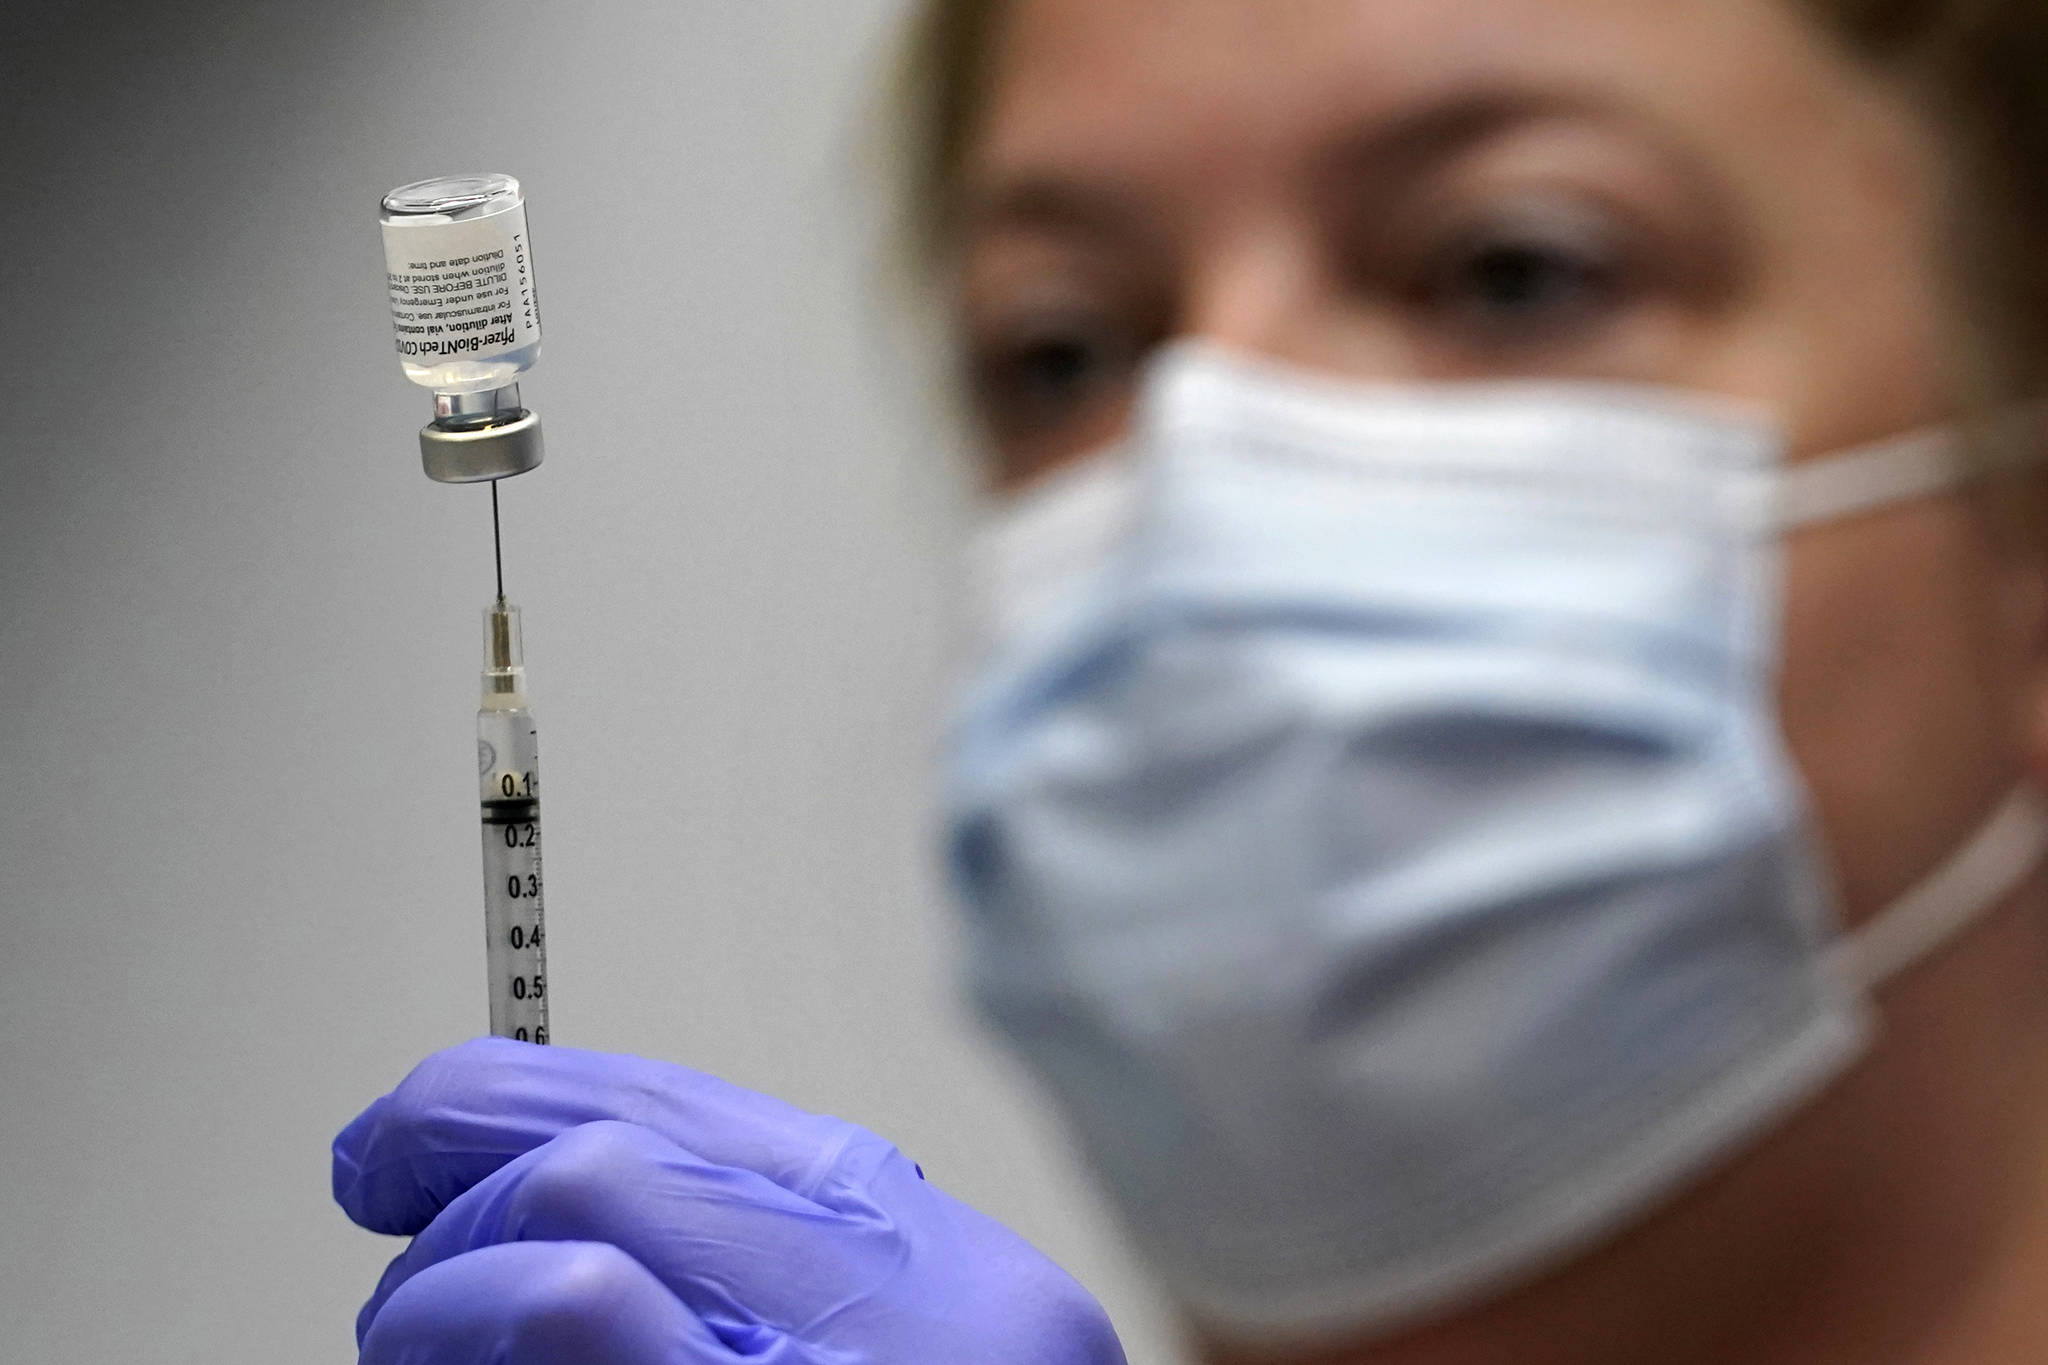 FILE - In this March 2, 2021, file photo, pharmacy technician Hollie Maloney loads a syringe with Pfizer's COVID-19 vaccine at the Portland Expo in Portland, Maine. The U.S. gave full approval to Pfizer's COVID-19 vaccine on Monday, Aug. 23, 2021. (AP Photo / Robert F. Bukaty)